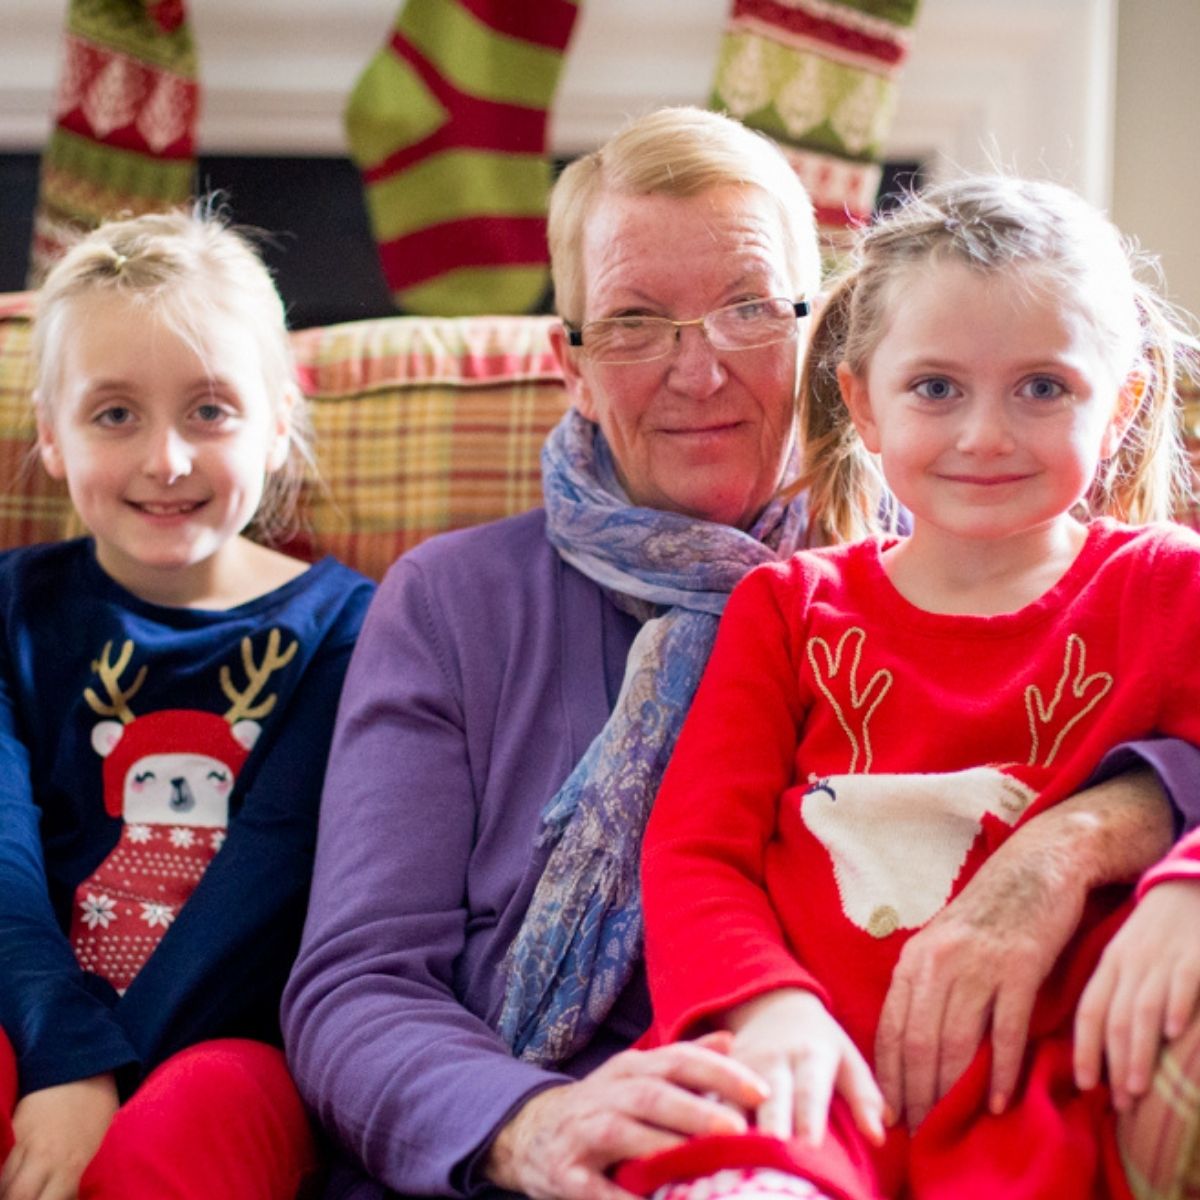 A Grandma sits on a couch dressed for Christmas with her two granddaughters.